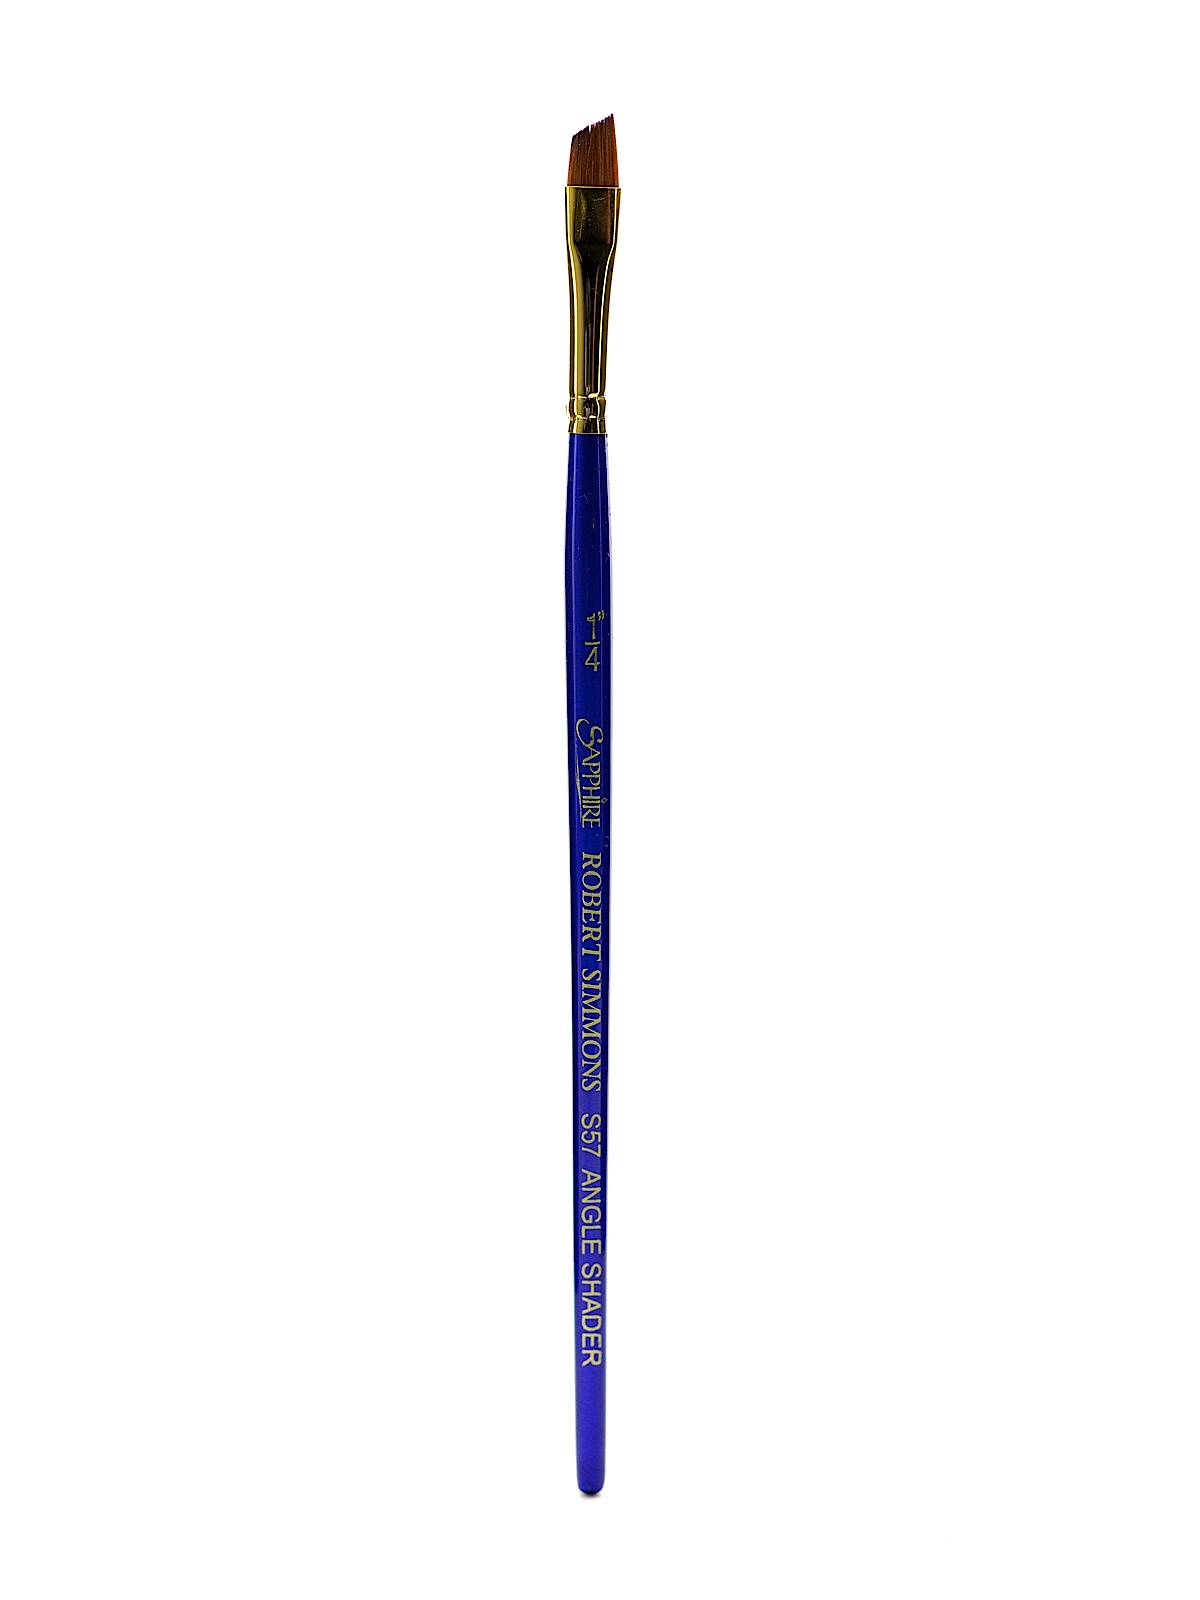 Sapphire Series Synthetic Brushes Short Handle 1 4 In. Angle Shader S57